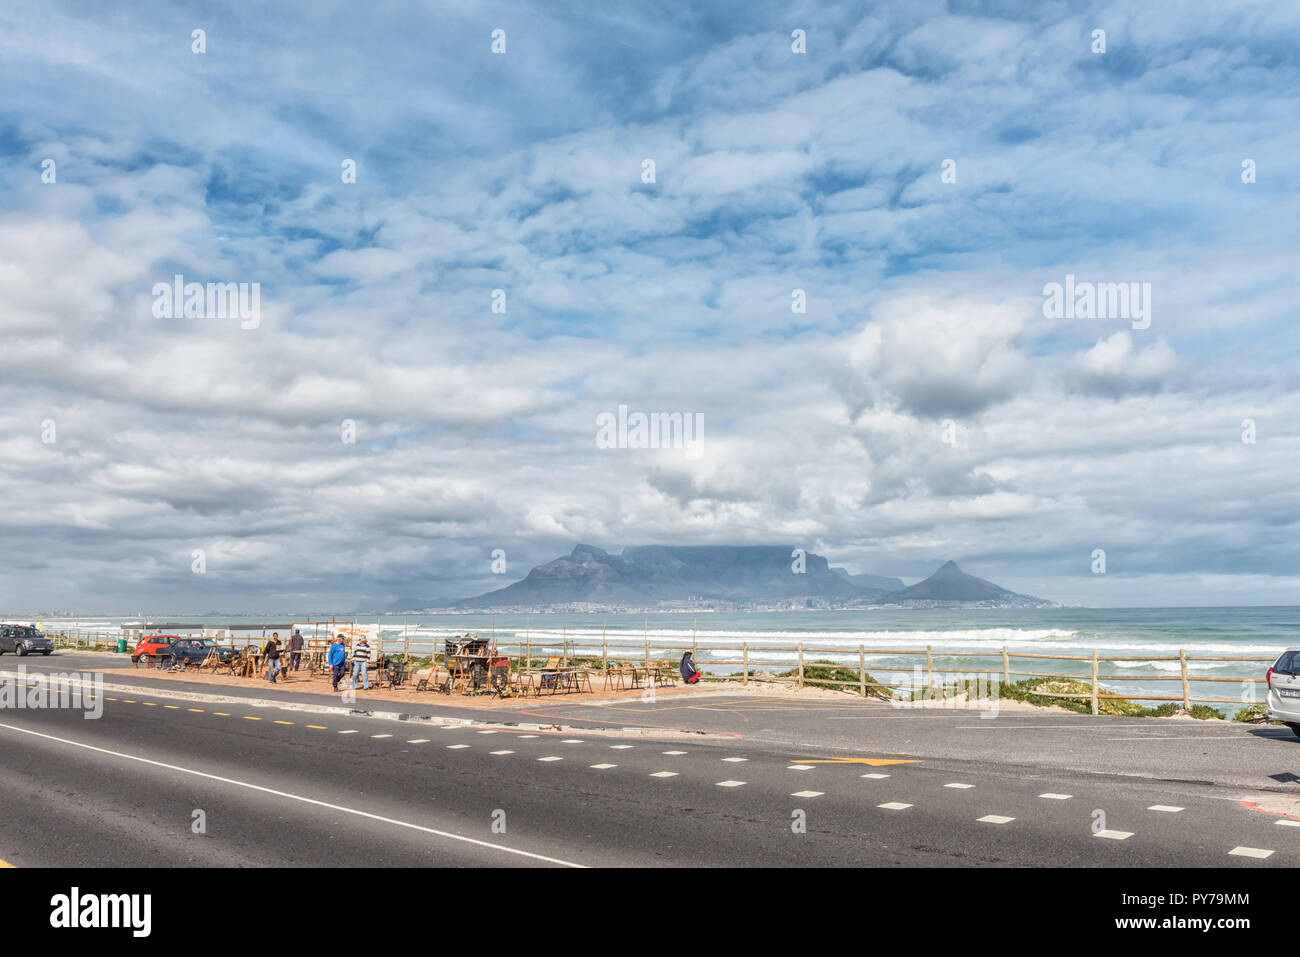 CAPE TOWN, SOUTH AFRICA, AUGUST 14, 2018: The Cape Town Central Business District and Table Mountain as seen across Table Bay from Bloubergstrand. An  Stock Photo